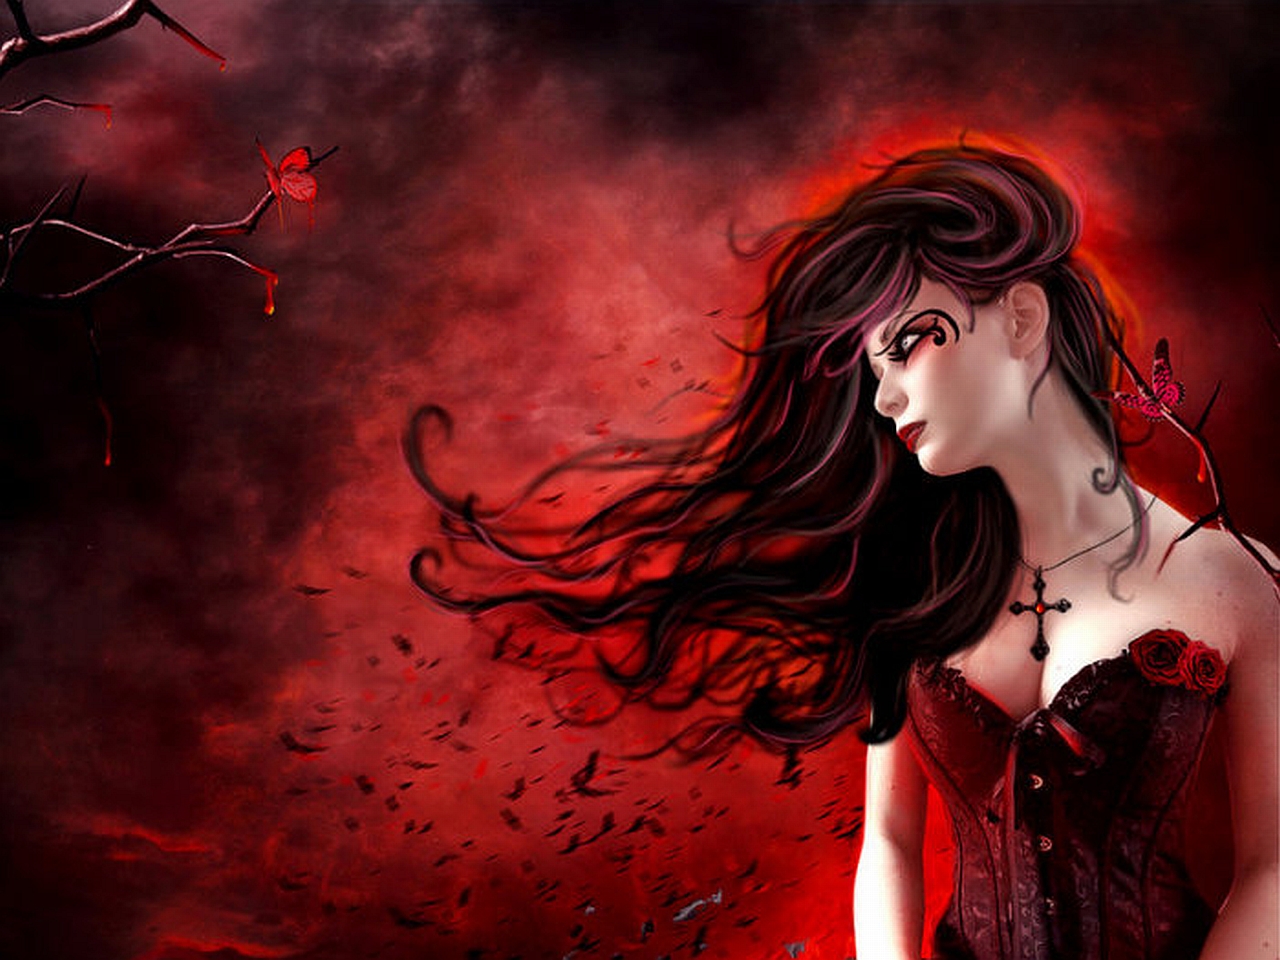 Free download Gothic Dark Wallpapers Download Free Dark Gothic Backgrounds  500x424 for your Desktop Mobile  Tablet  Explore 69 Red Roses Black  Background  Red Roses Wallpaper Black Roses Background Red Roses  Background